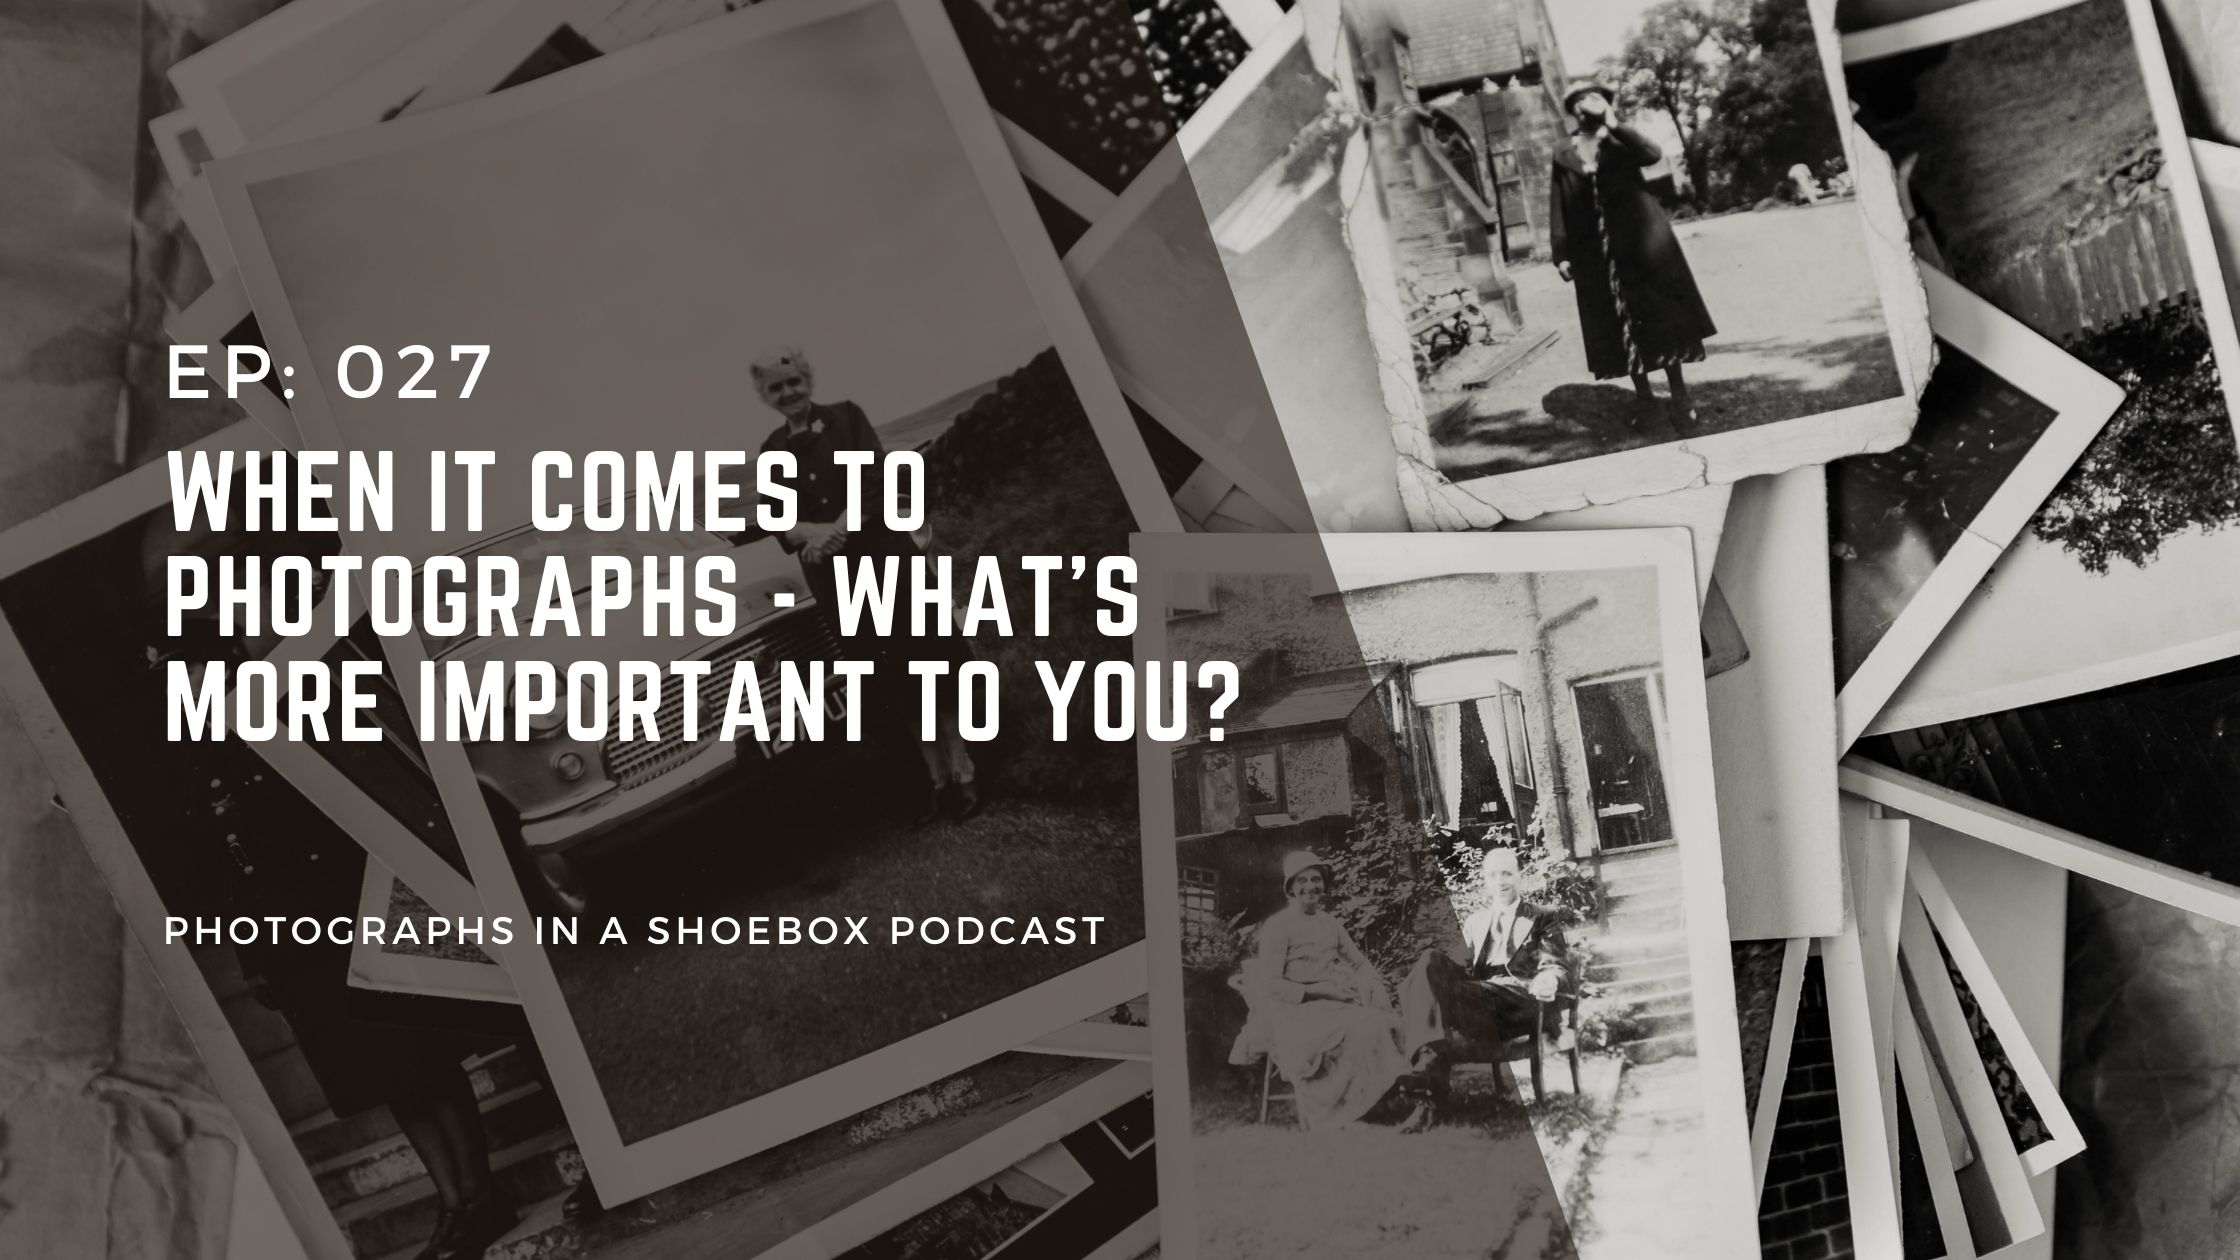 Old black and white photographs as a backdrop to the podcast title - when it comes to photographs what matters to you?